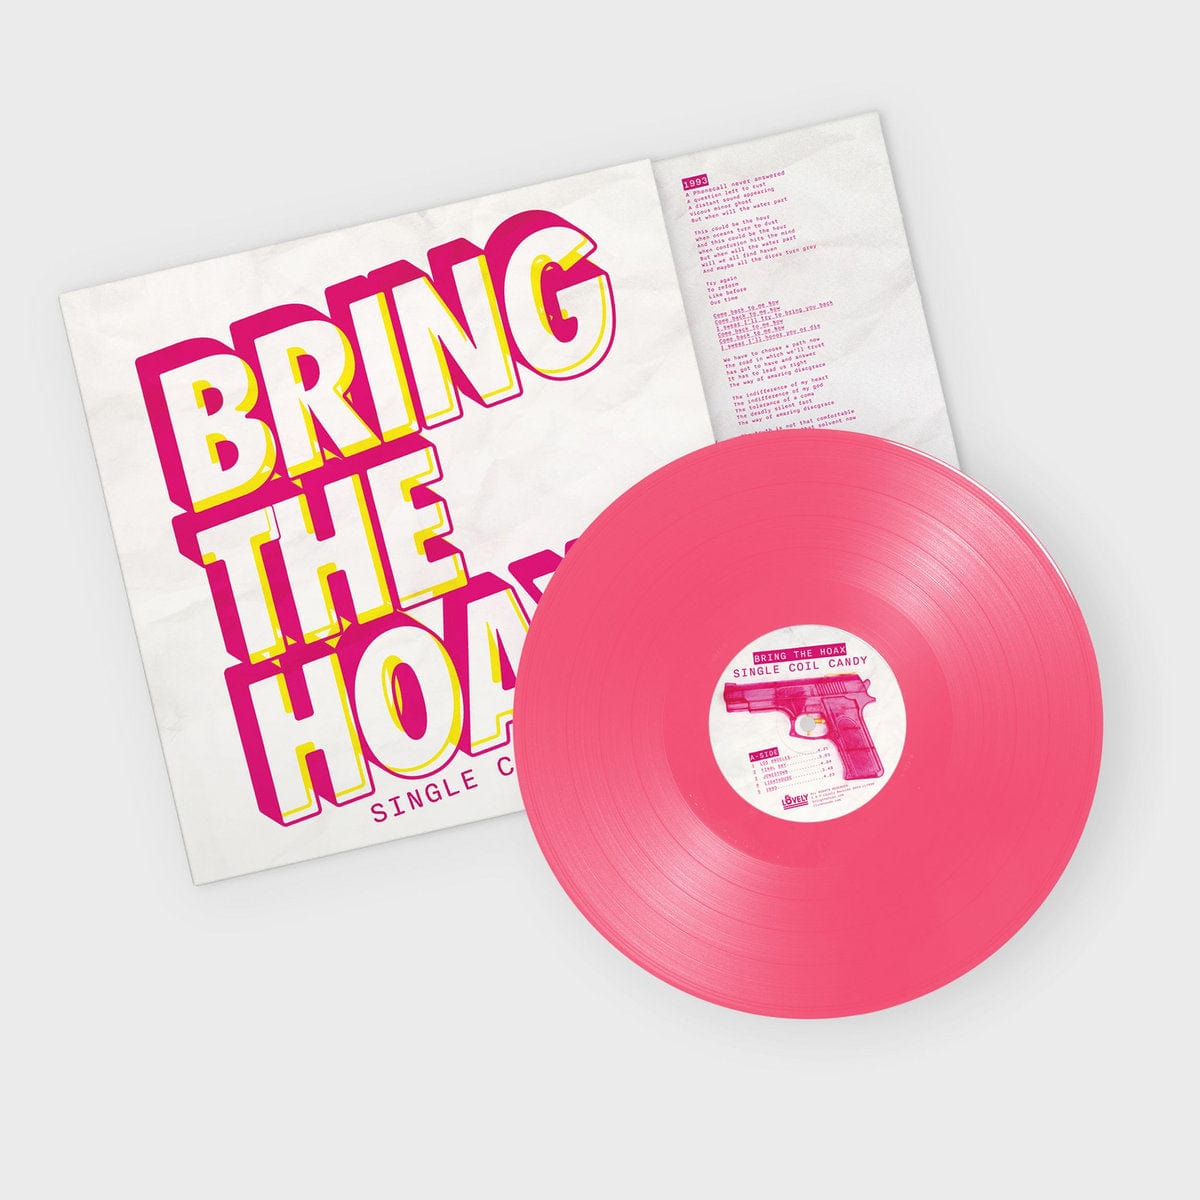 Bring the Hoax - Single Coil Candy (Pink Vinyl)